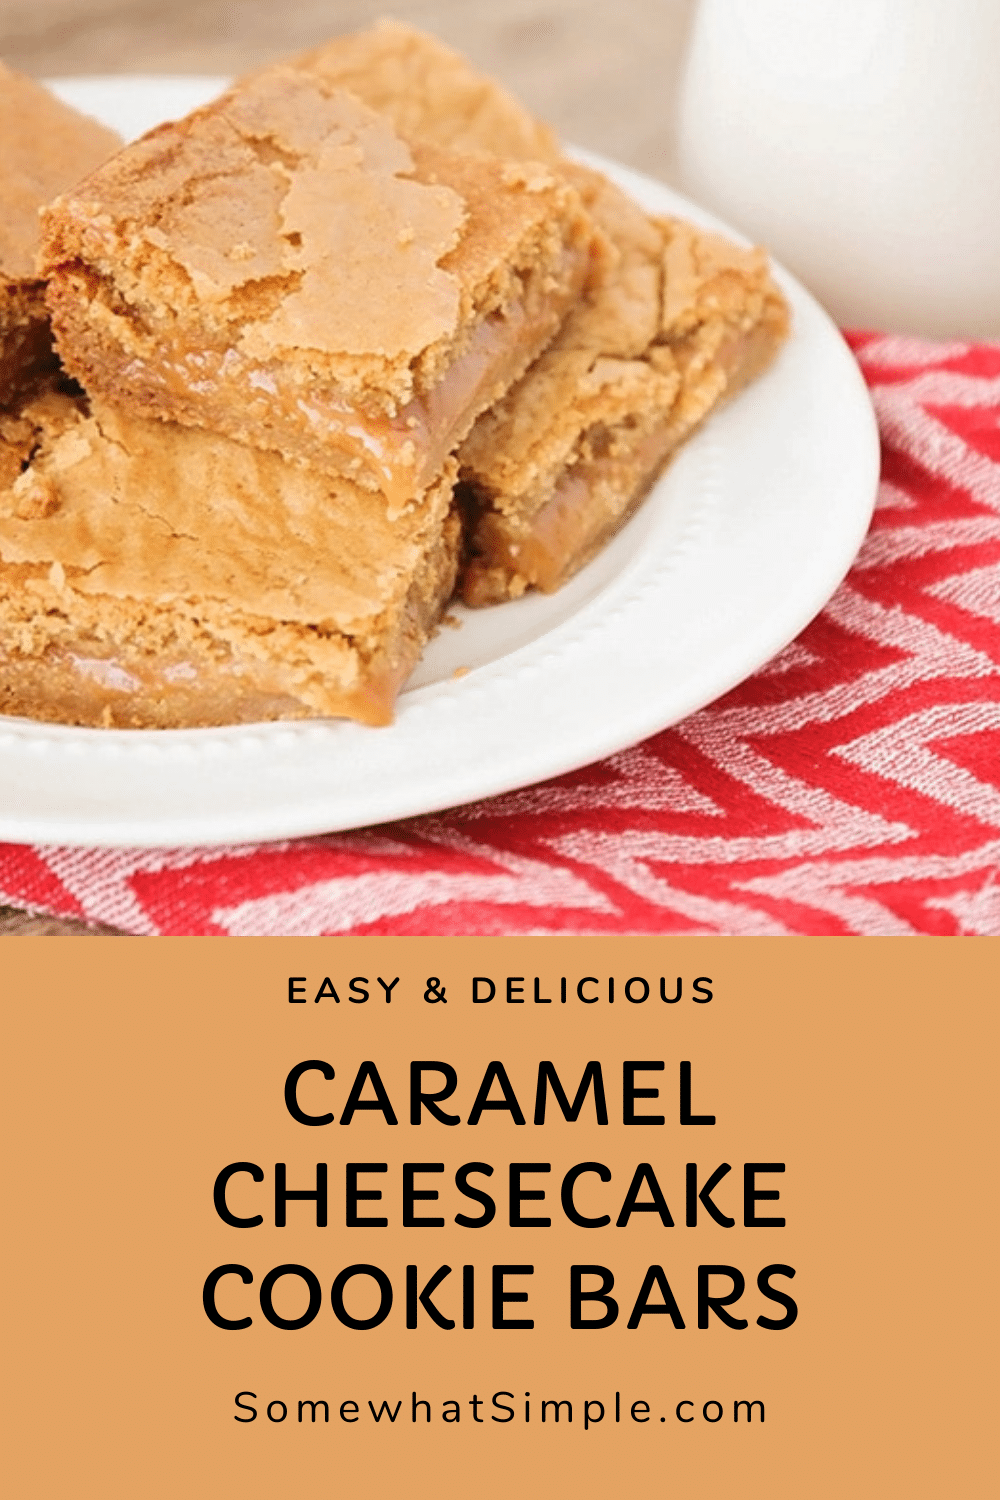 Caramel cheesecake cookie bars are a delicious salty & sweet dessert that's super easy to make! All of the delicious cheesecake flavors drizzled with caramel, all in an amazing cookie bar. This recipe is easy to make and is guaranteed to knock your socks off. via @somewhatsimple